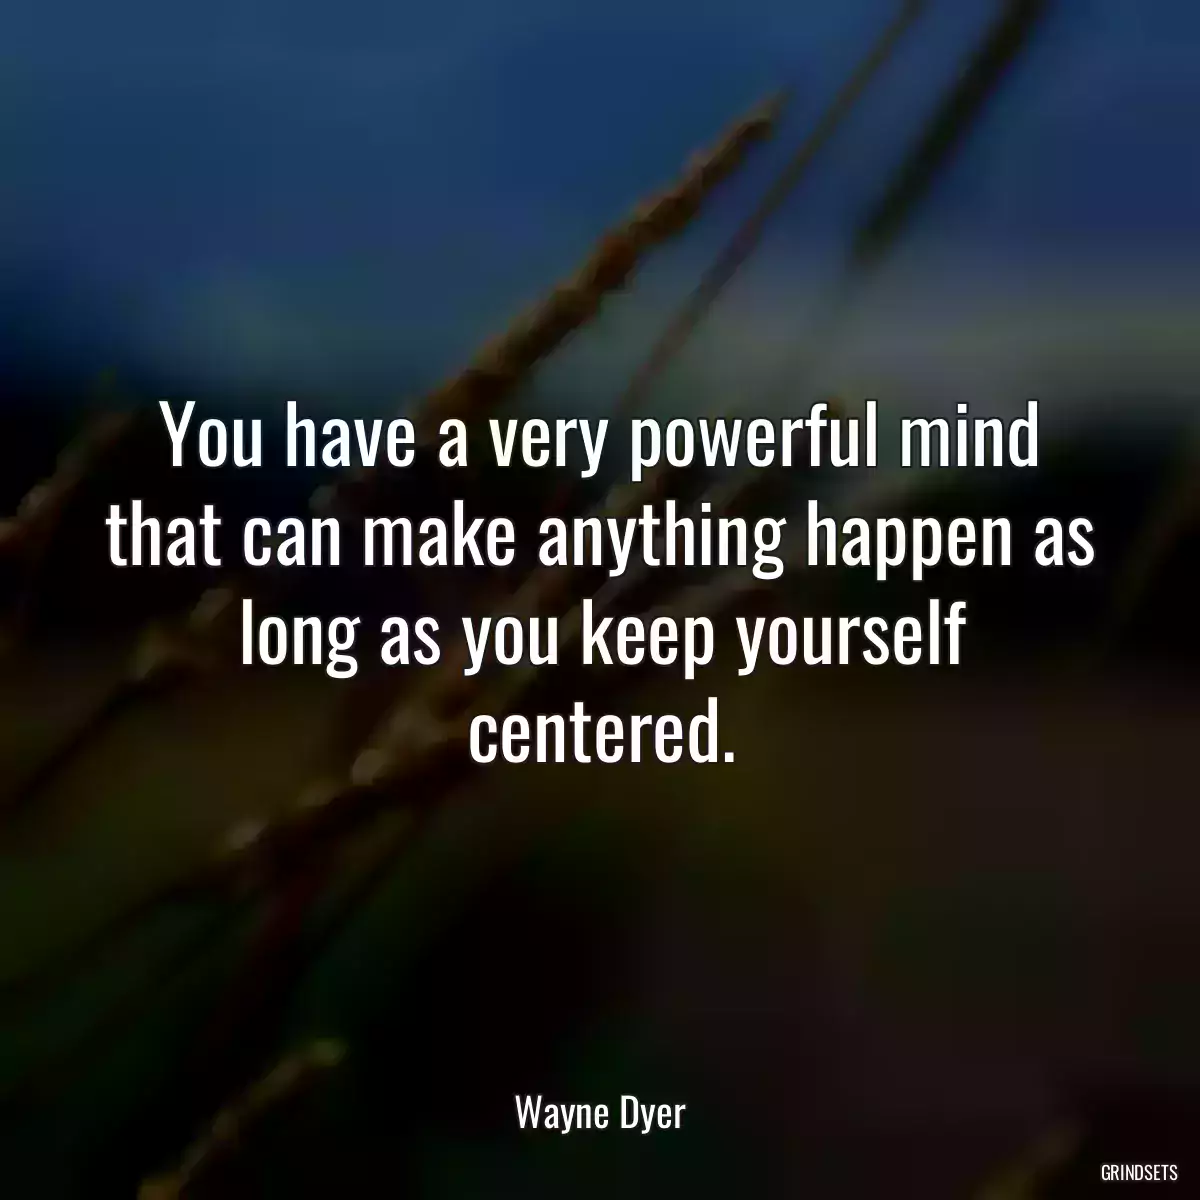 You have a very powerful mind that can make anything happen as long as you keep yourself centered.